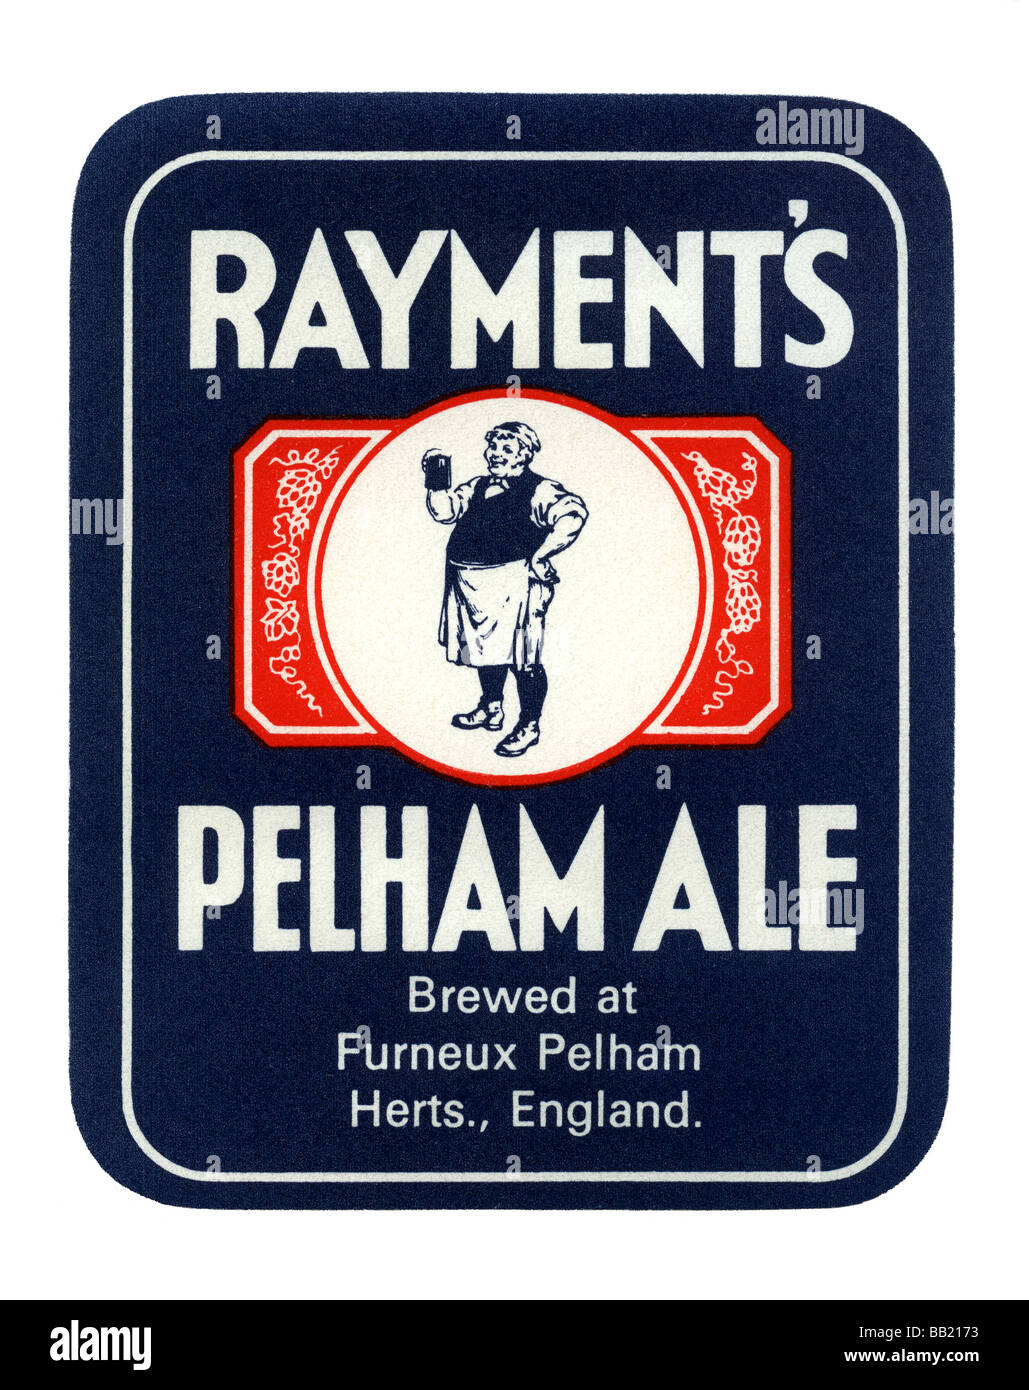 Old British beer label for Rayment's Pelham Ale, Furneux Pelham, Hertfordshire, England Stock Photo